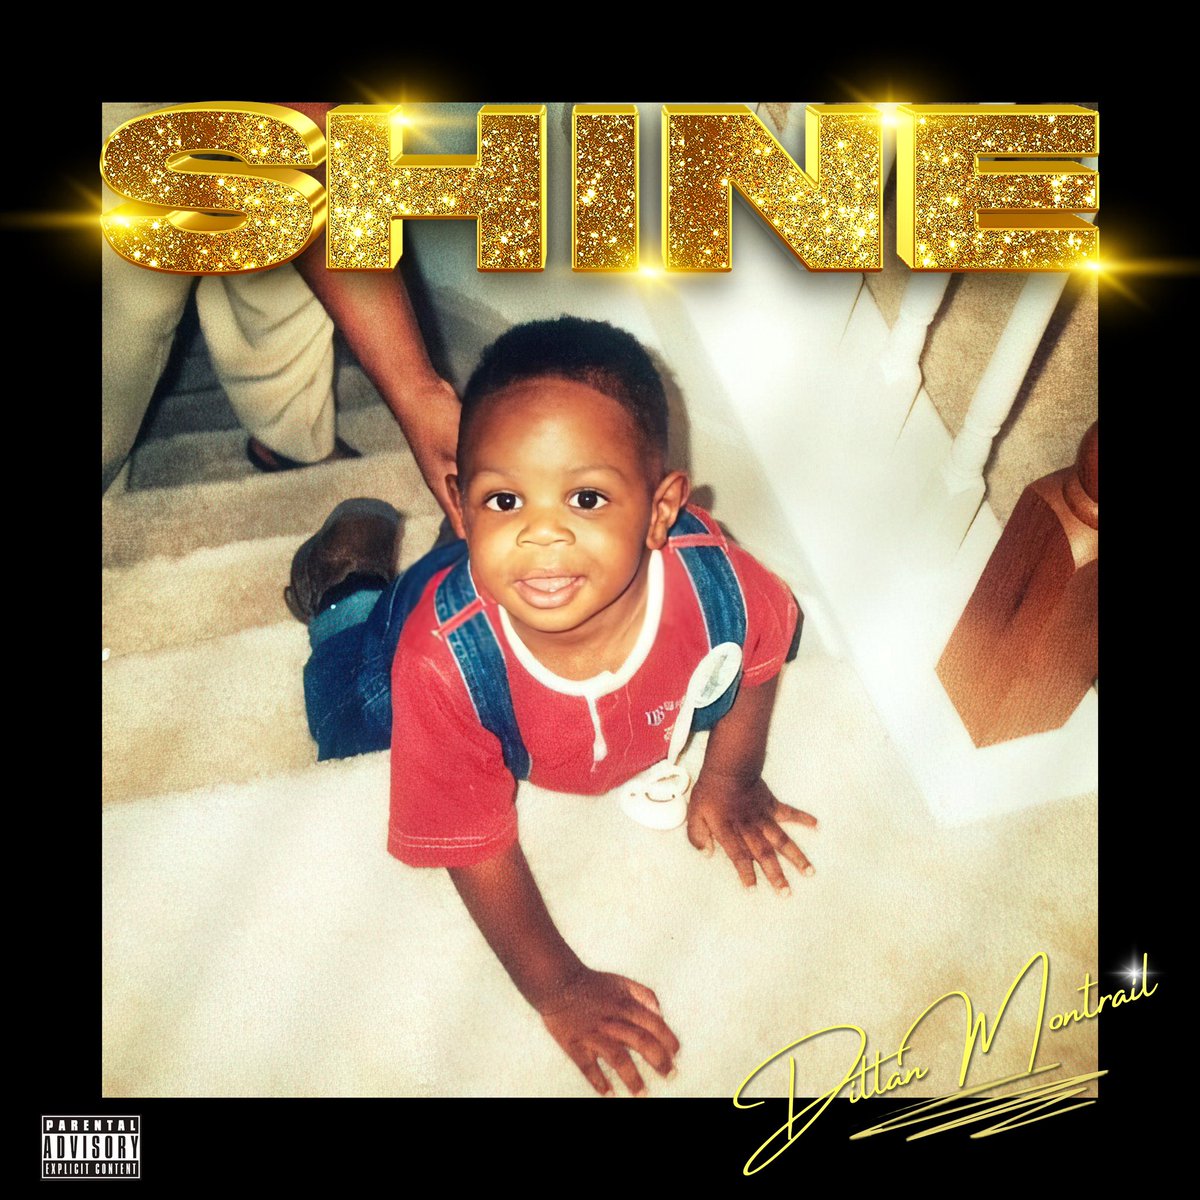 MY DEBUT SINGLE #SHINE✨ DROPS ON TUESDAY JUNE 6th!!!!!!🚨🚨🚨🥳🥳🥳✨✨✨

THIS SONG IS STRICTLY FOR  PEOPLE WHO NEED A GLOWUP POST -BREAKUP ❤️‍🩹!!!!!! 

Cant wait for you guys to HEAR IT🔥🔥🔥🔥🔥🔥🚨🚨 

#NewMusic2023 #newmusictuesday #spotifyplaylist #hiphop #rapper #applemusic